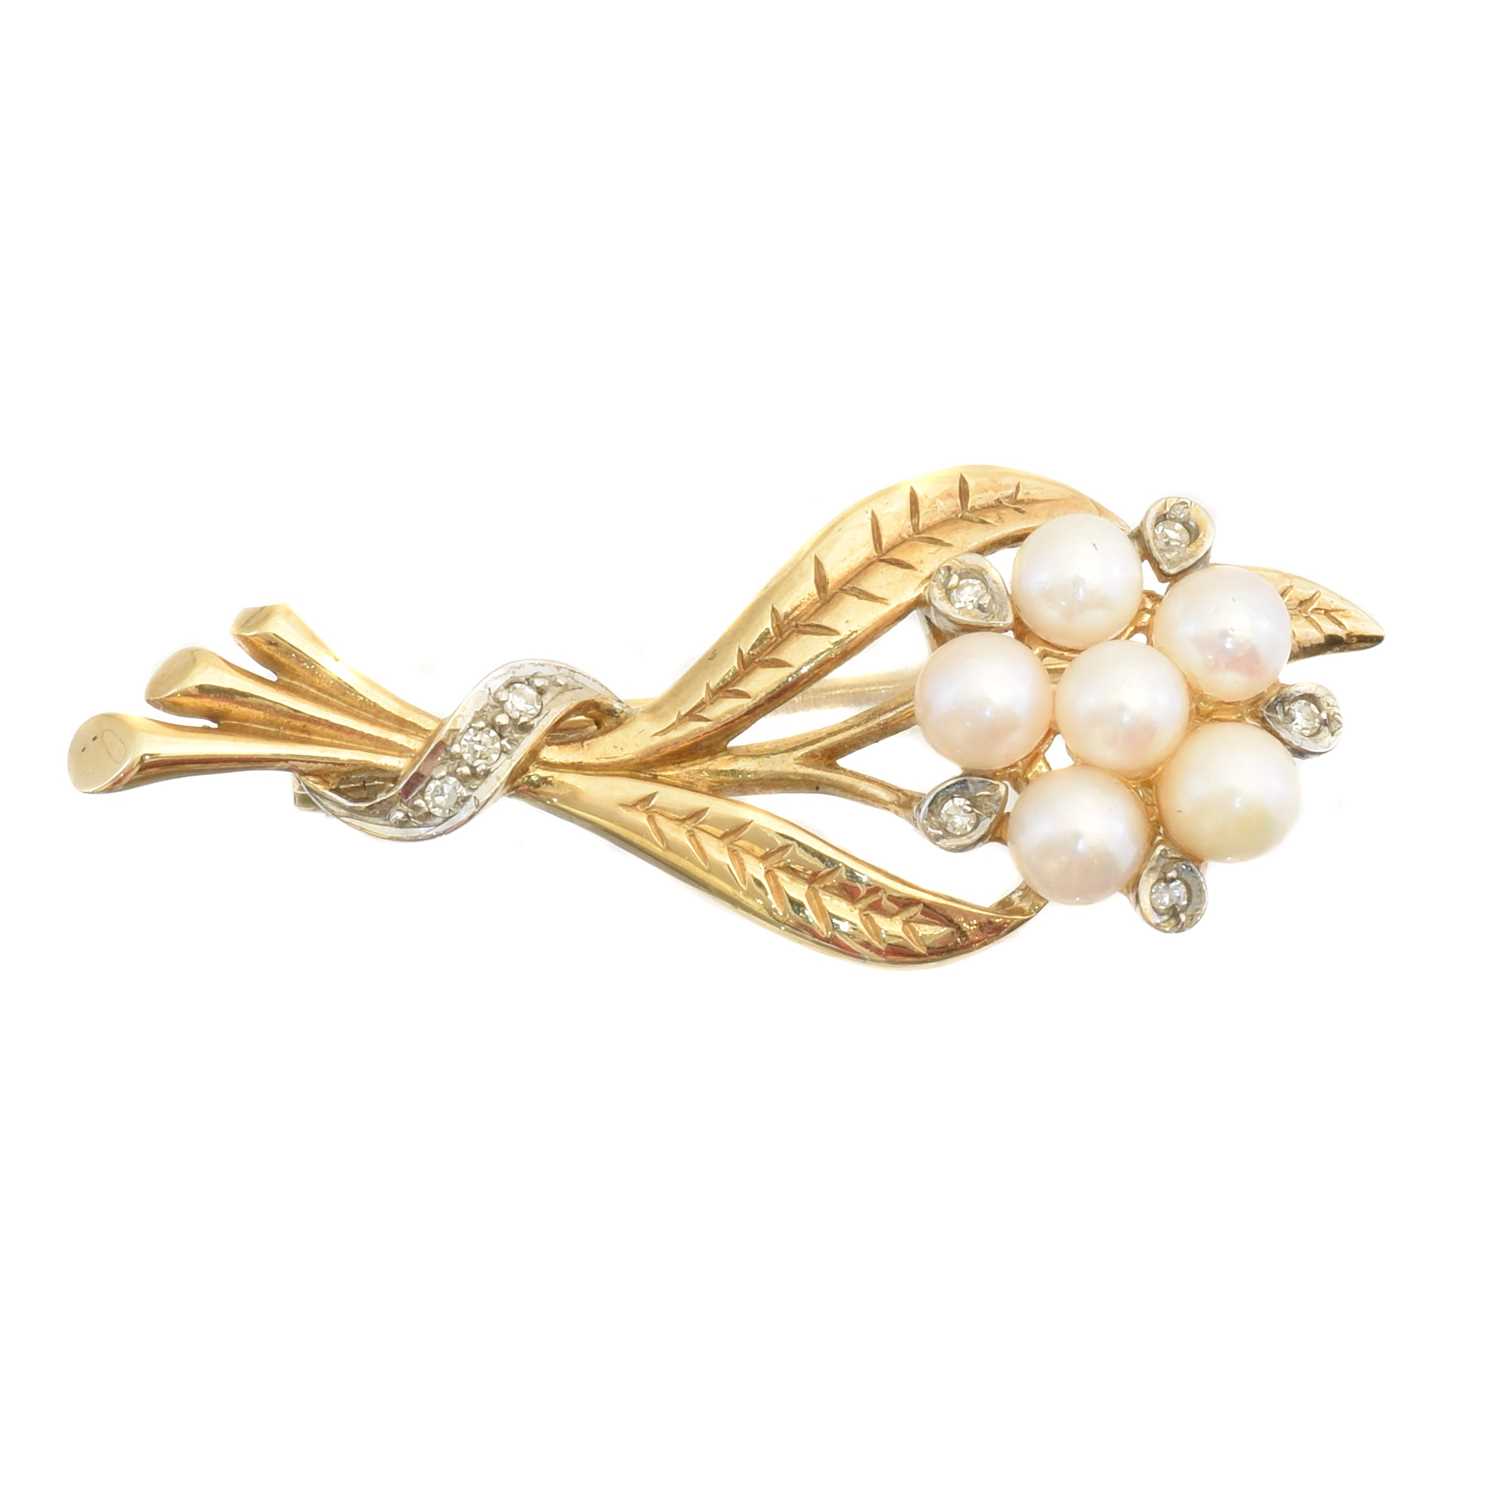 Lot 7 - A 9ct gold cultured pearl and diamond brooch